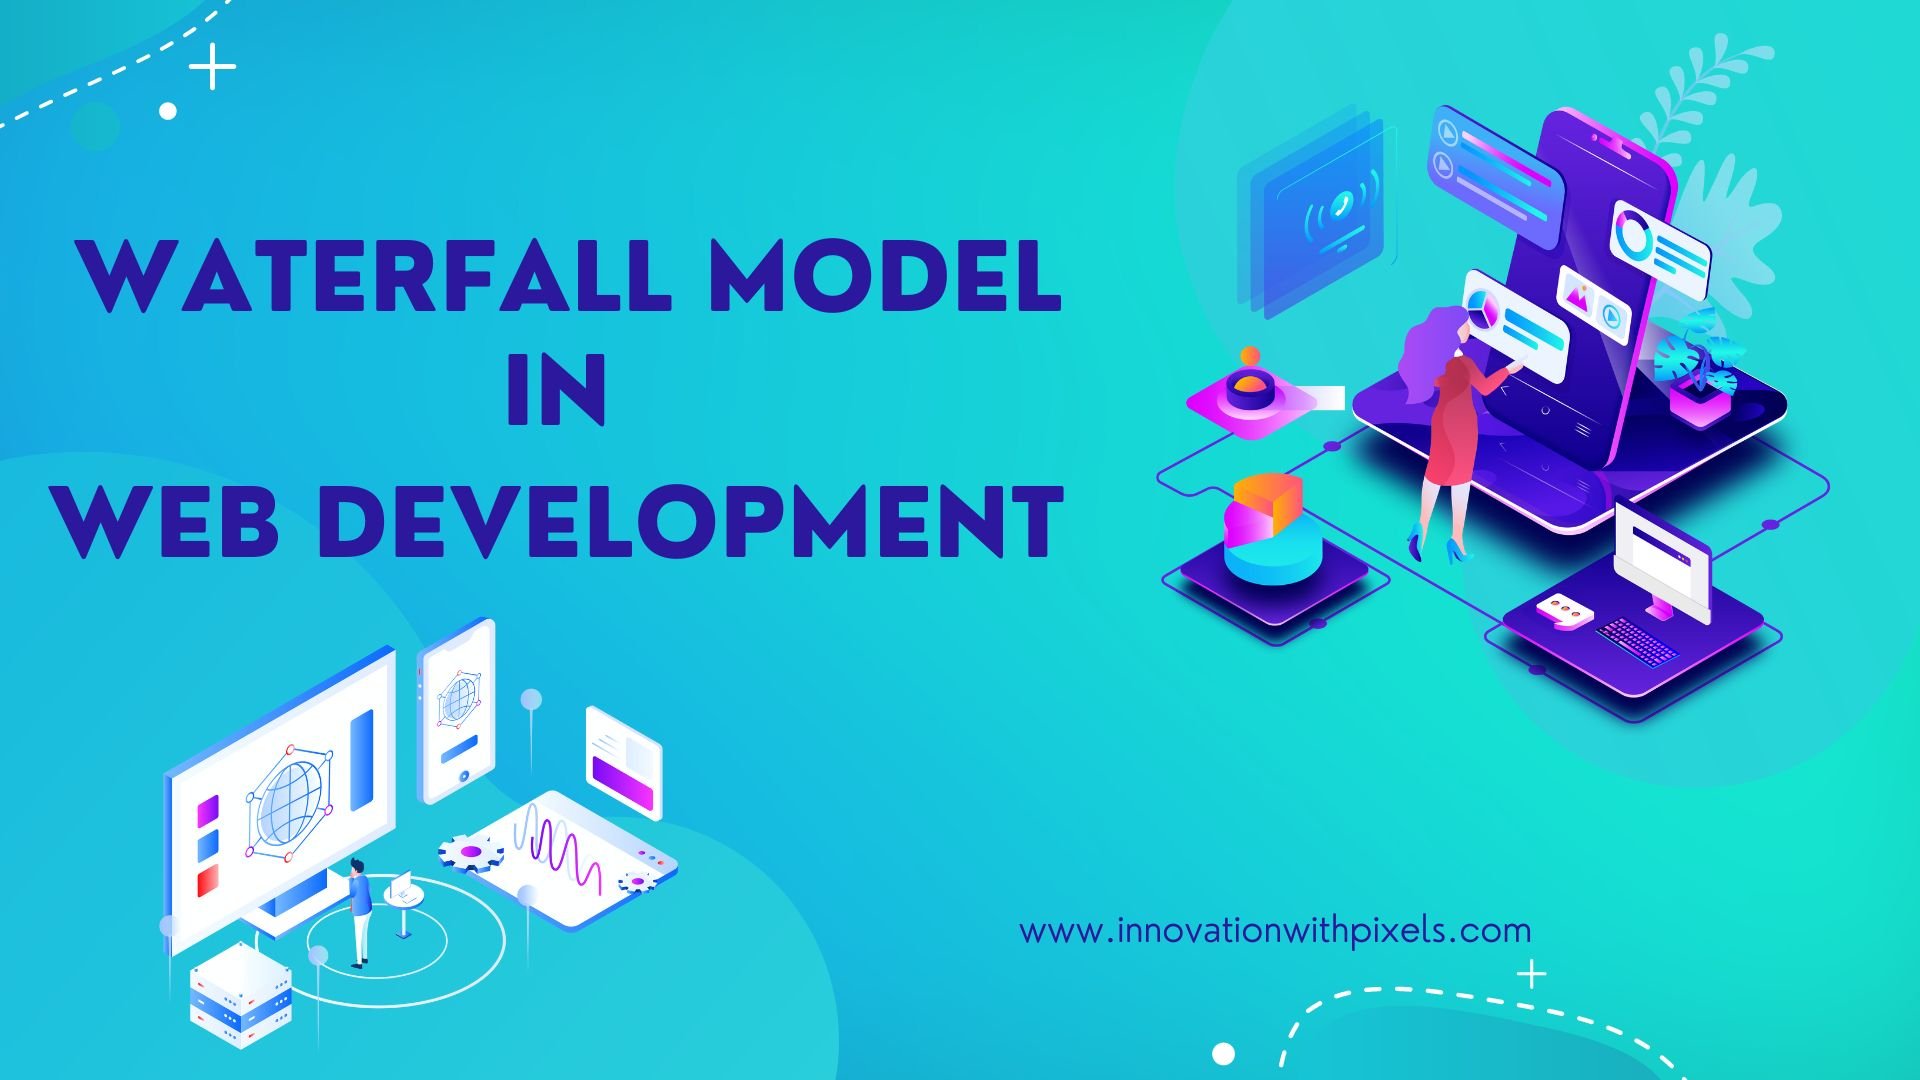 The Waterfall Model: A Comprehensive Guide to Its Definition, Process, and Applications